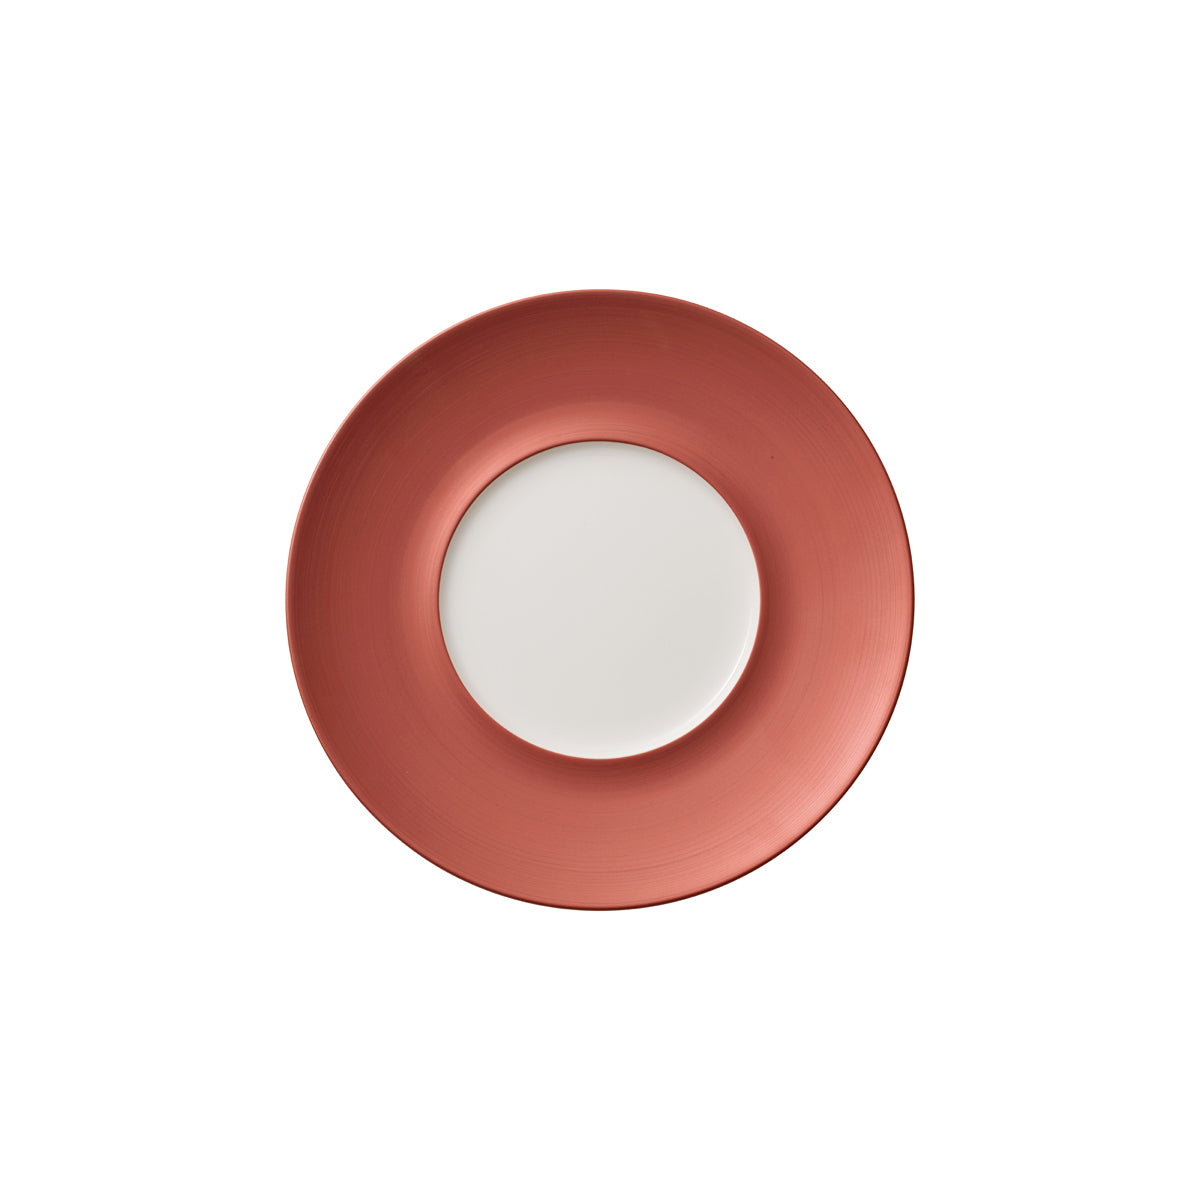 VB16-4070-2795 Villeroy And Boch Villeroy And Boch Copper Glow Plate Outside Wide Rim 290mm / 145mm Tomkin Australia Hospitality Supplies